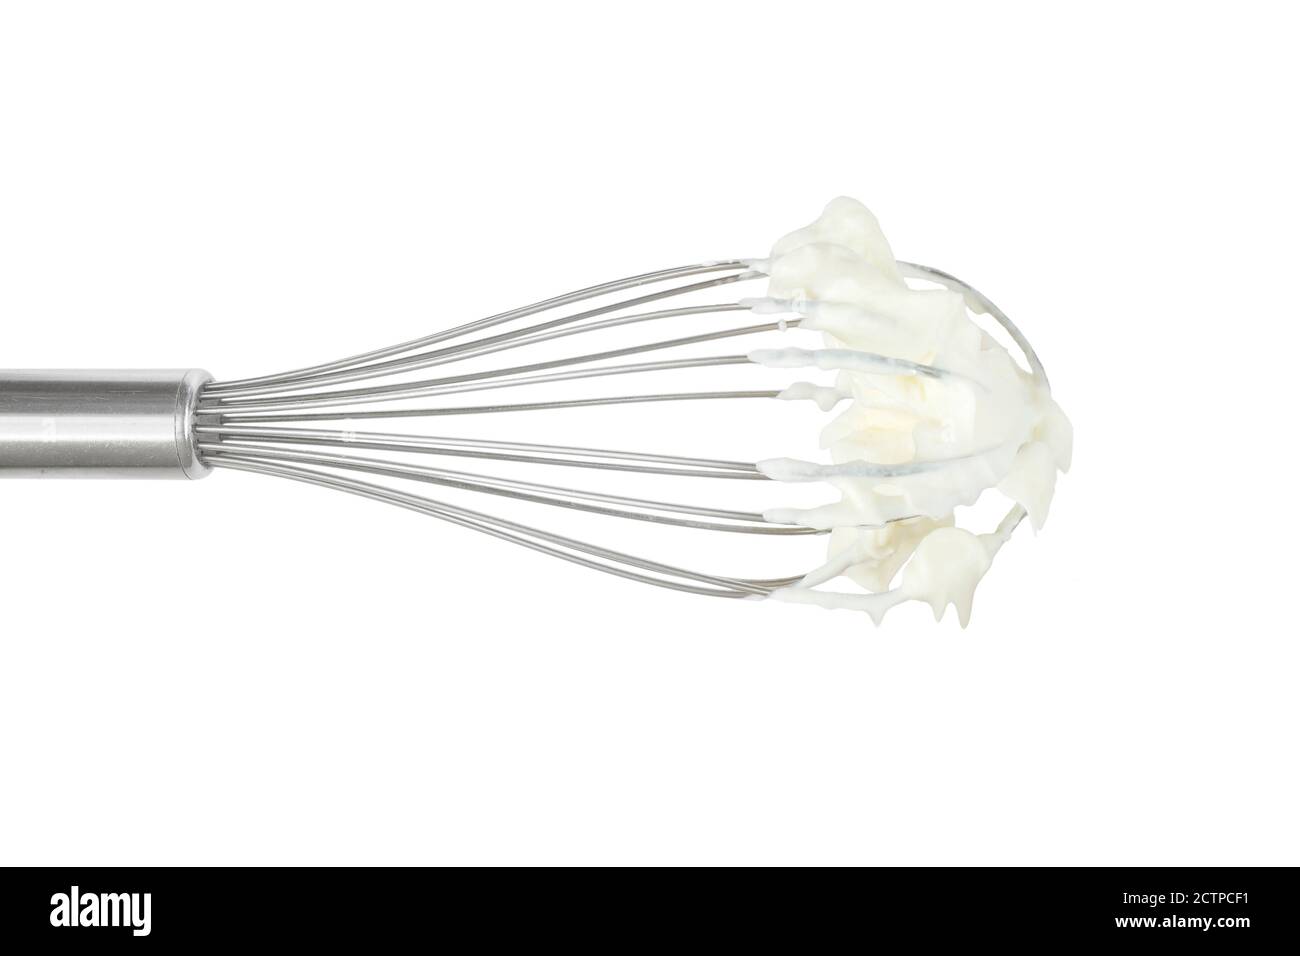 wire whisk, egg beater with whipping cream, isolated on white background, mock up or design element Stock Photo